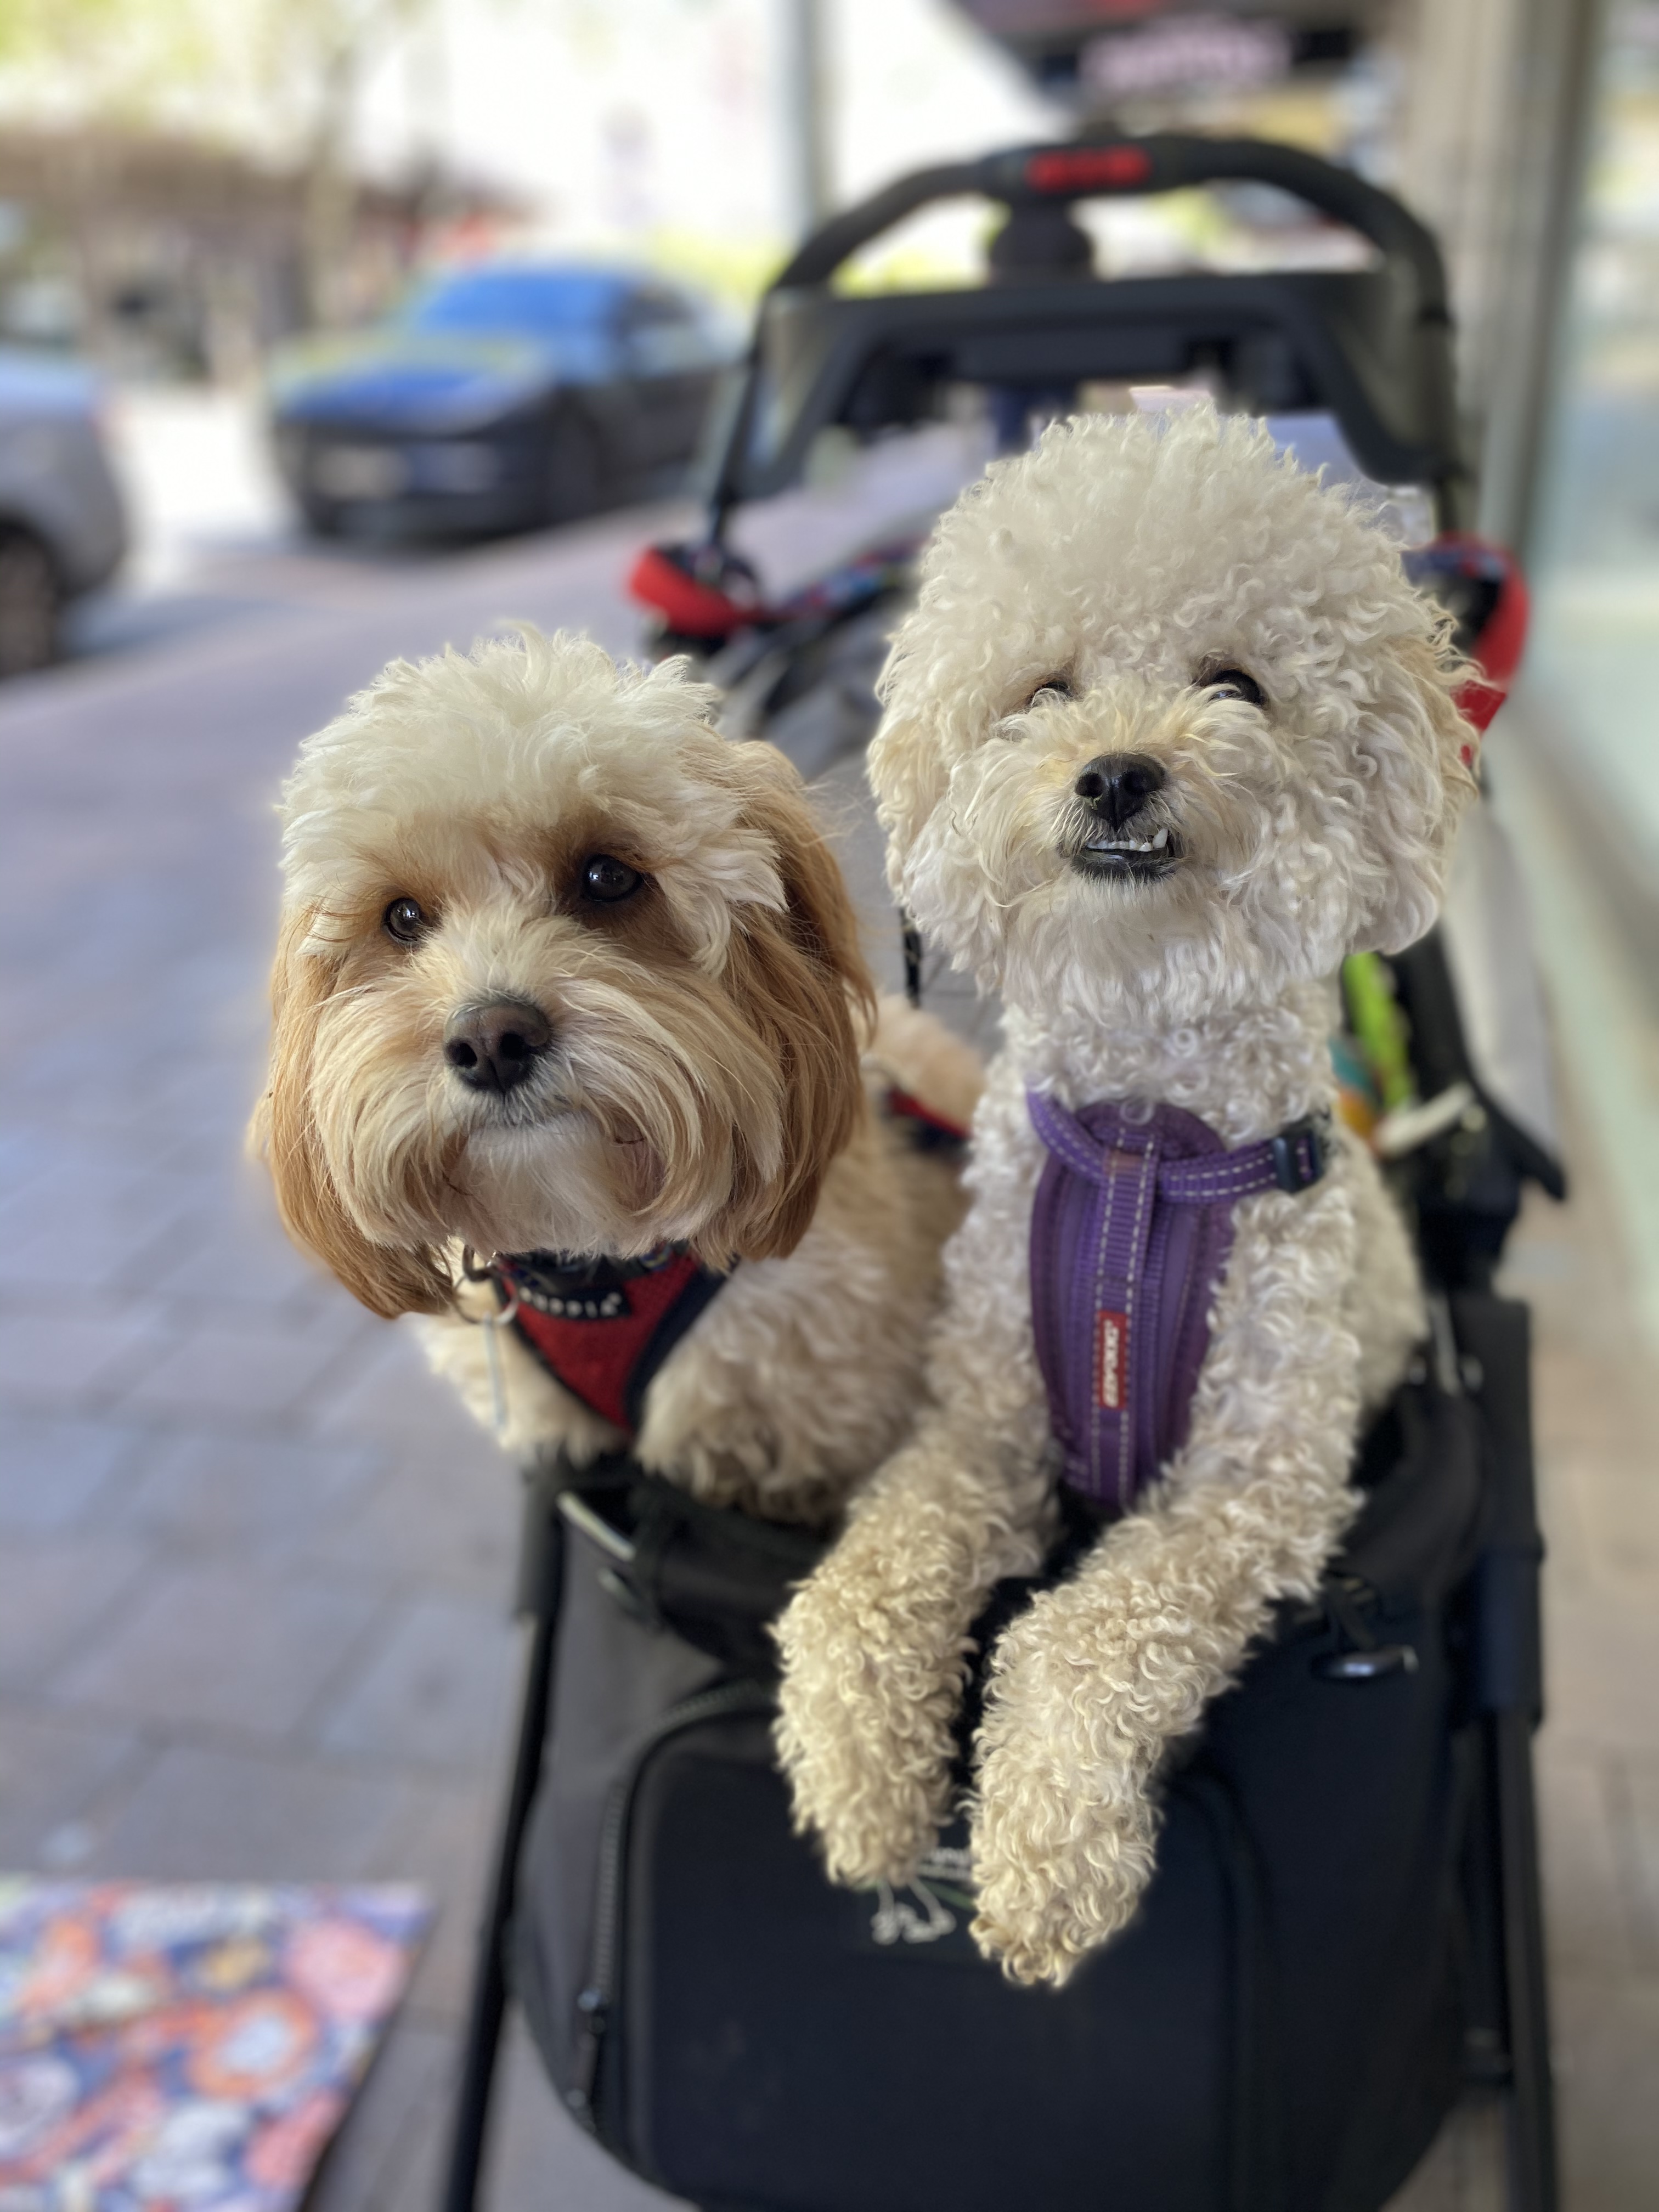 2 small oodles in a dog stroller